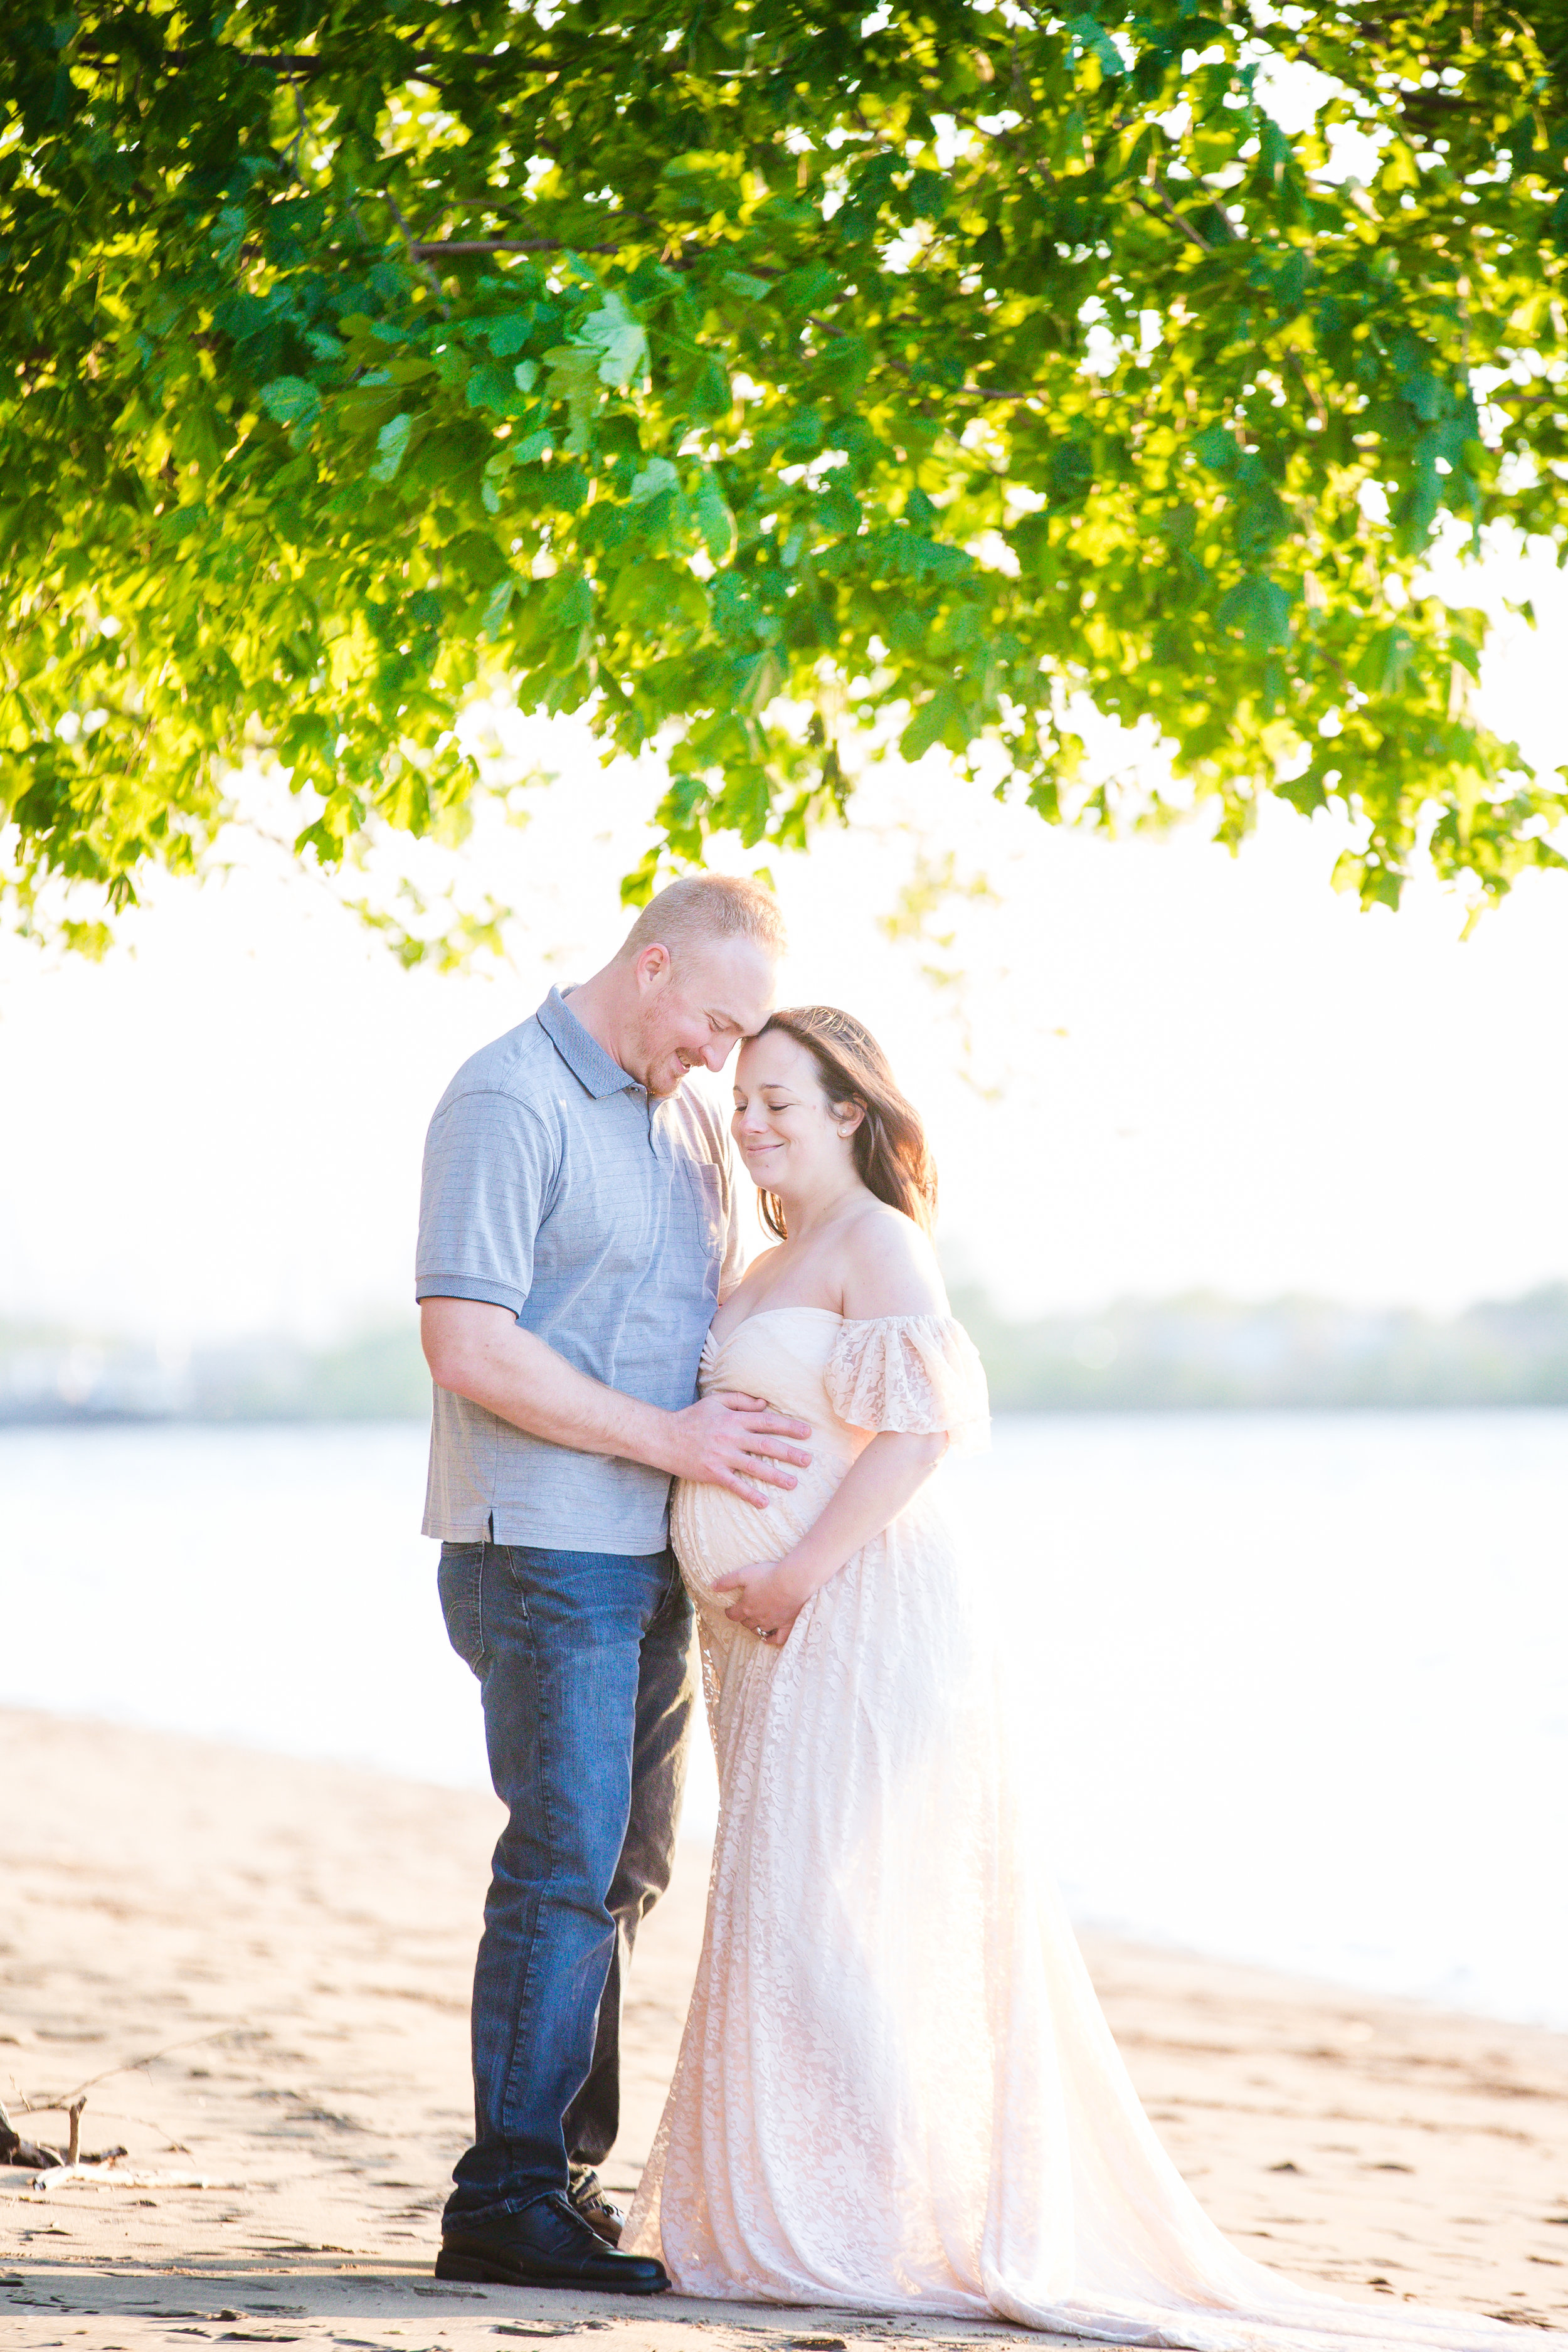 couple-holding-pregnant-belly-in-palmyra-nature-cove-burlington-county-new-jersey-photo-shoot.jpg